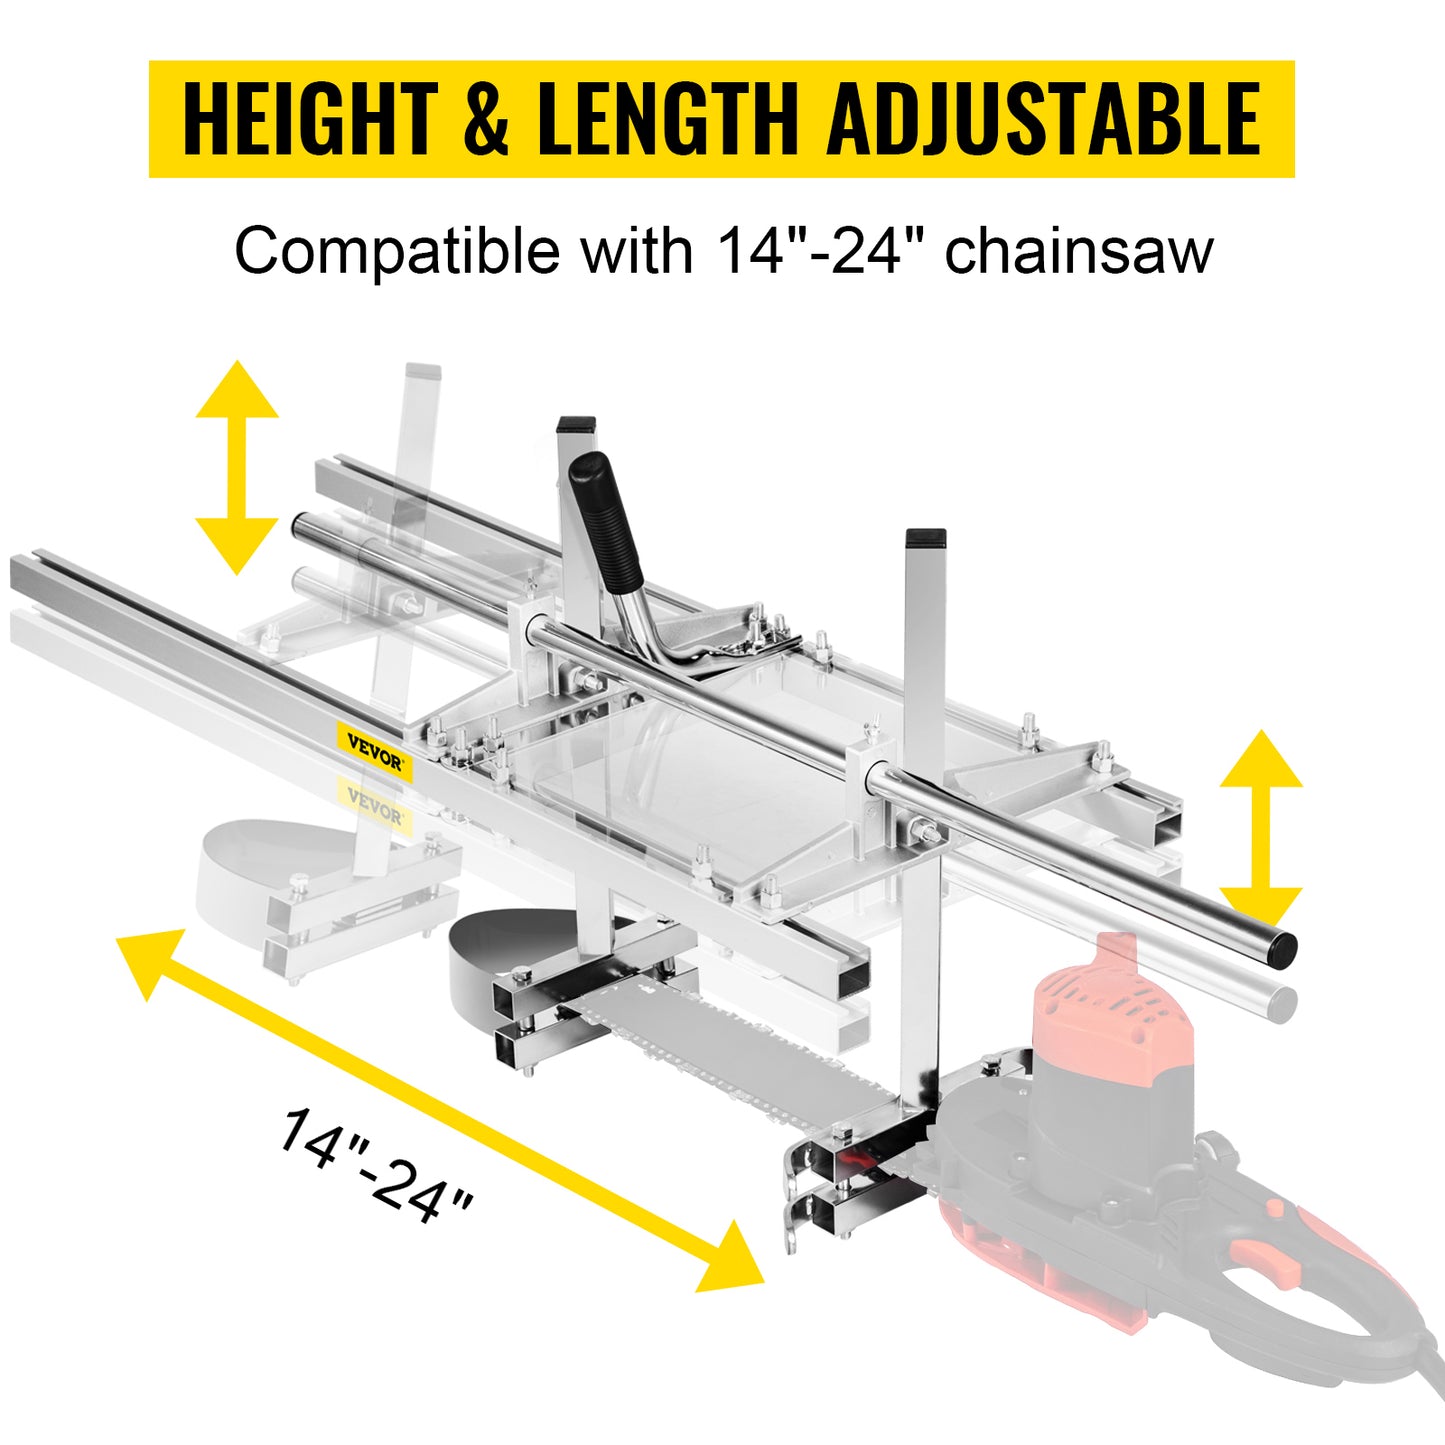 Portable Chainsaw Mill for 24, 36, and 48-inch Guide Bars, Crafting Lumber with Precision Using Aluminum and Steel Construction